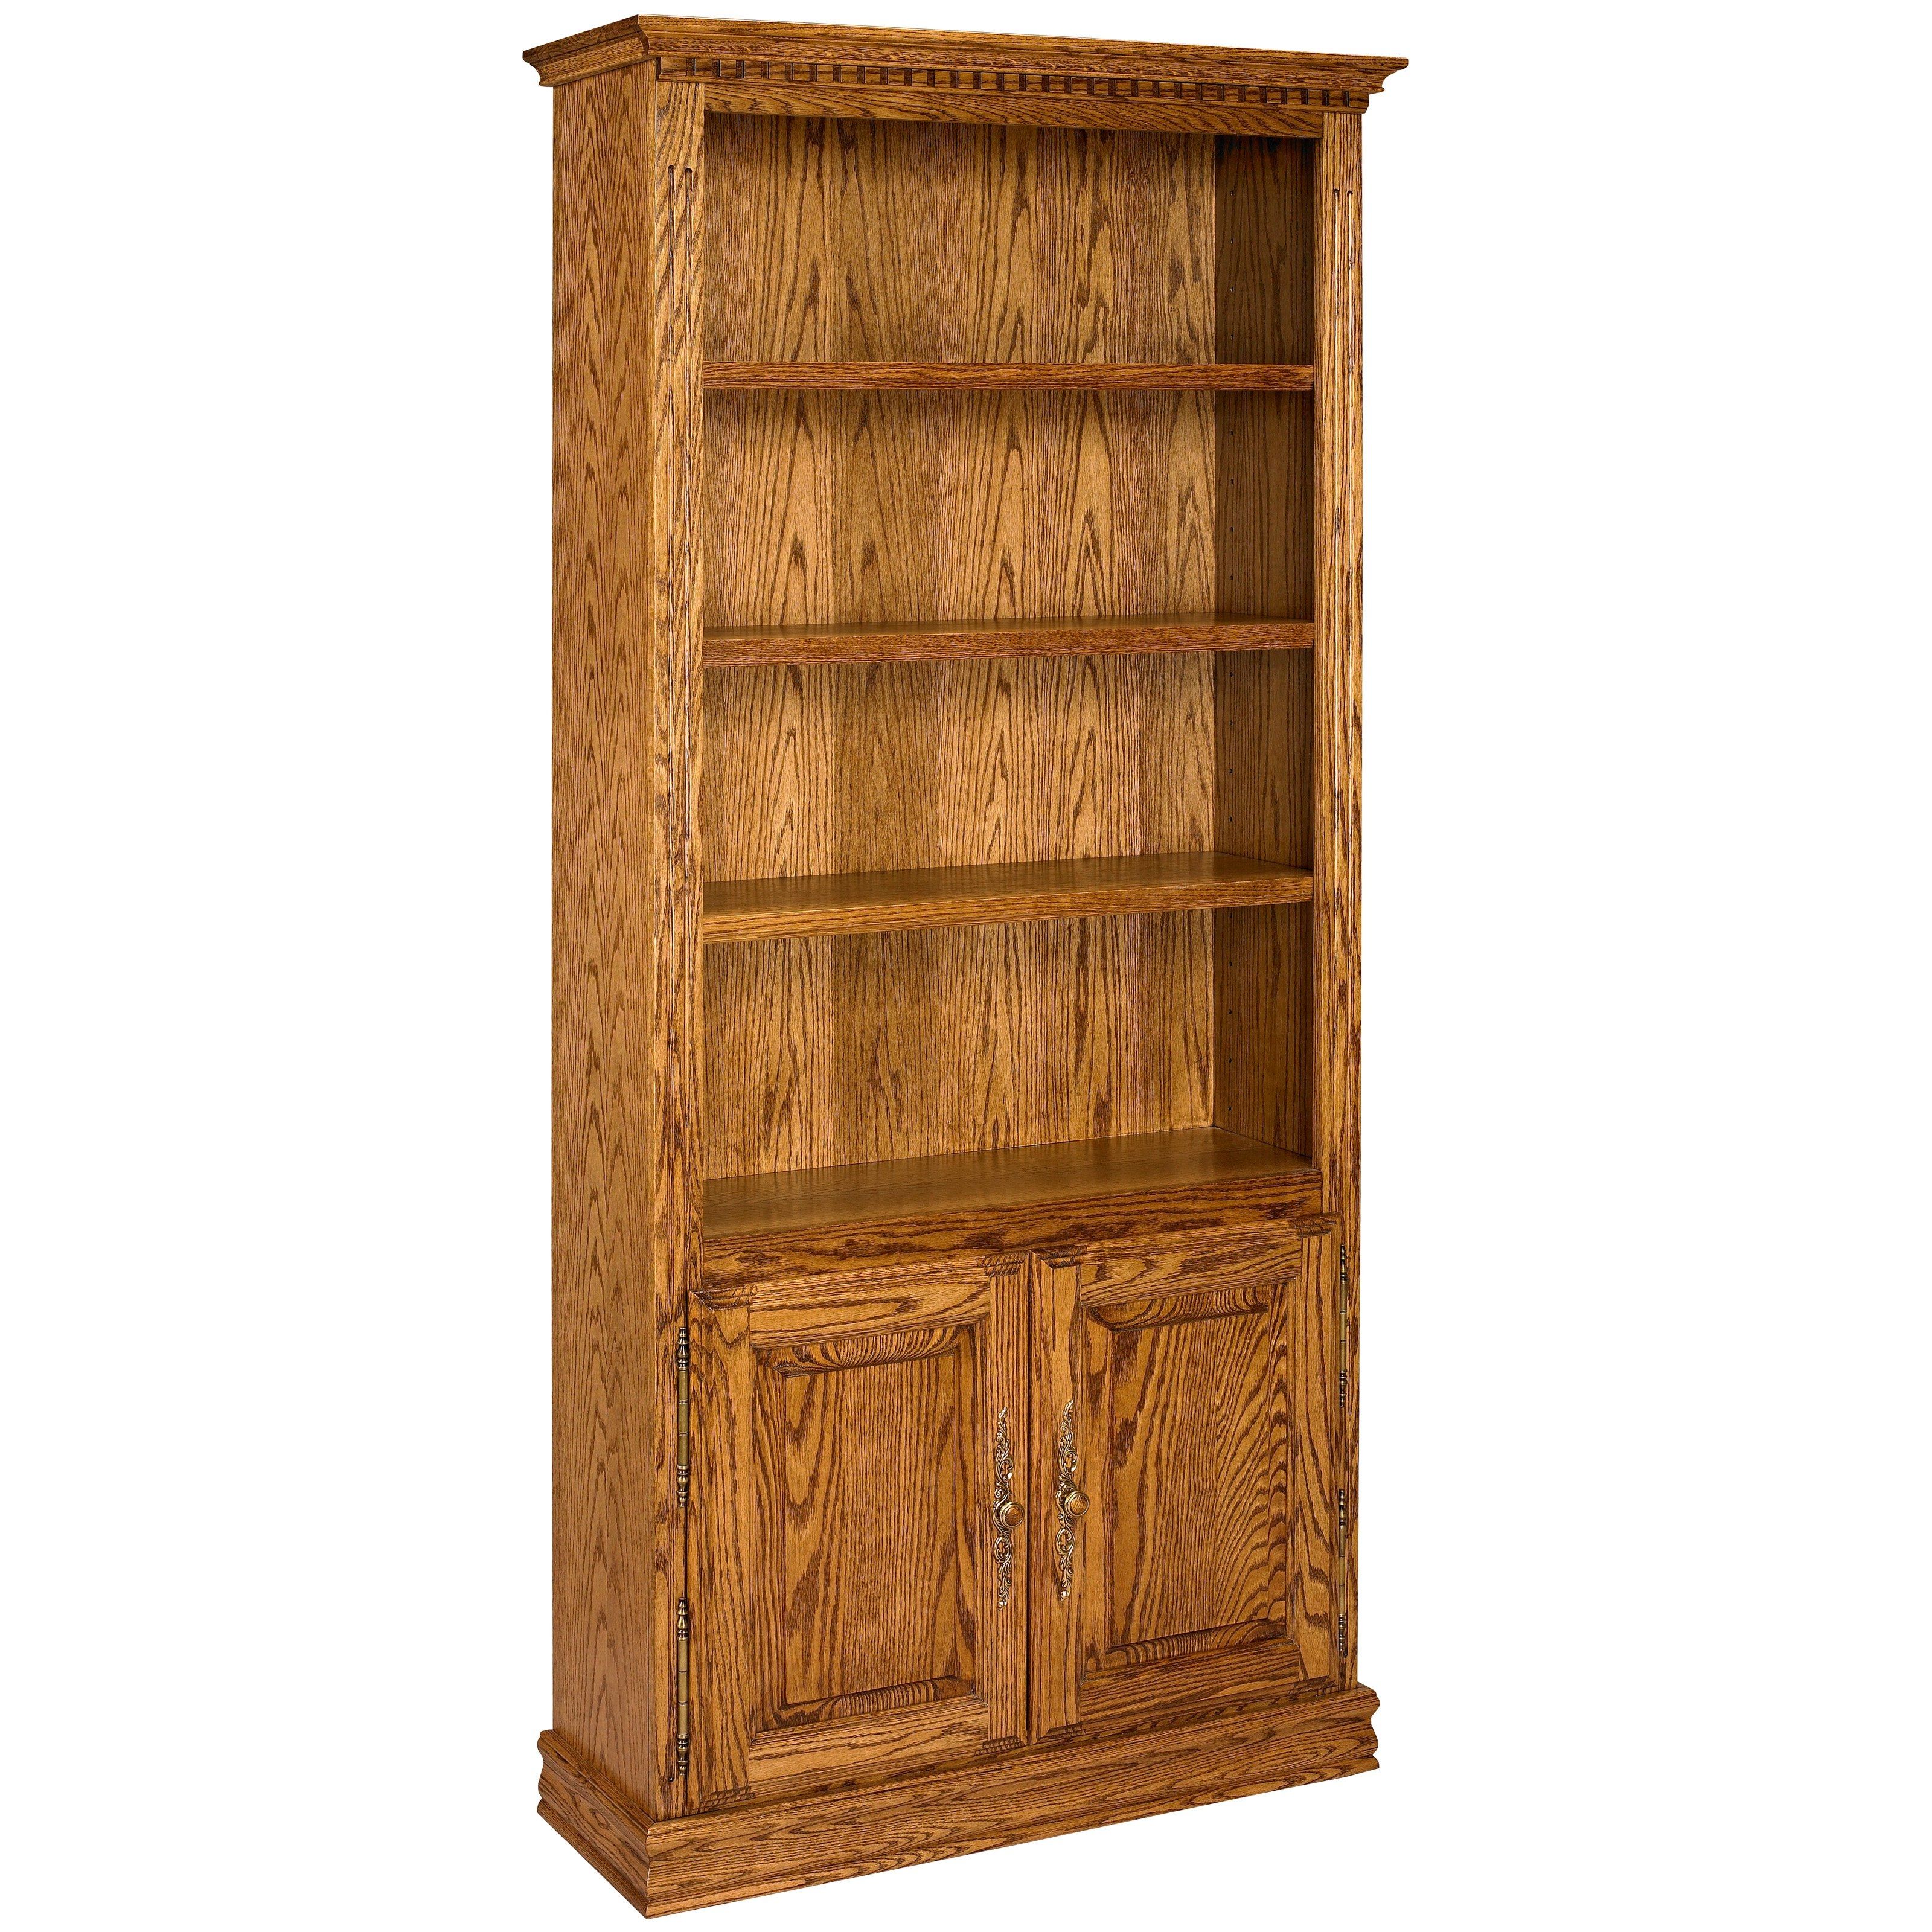 A E Solid Oak Americana Wood Bookcase Bookcases At Hayneedle With Solid Oak Bookcase (View 9 of 15)